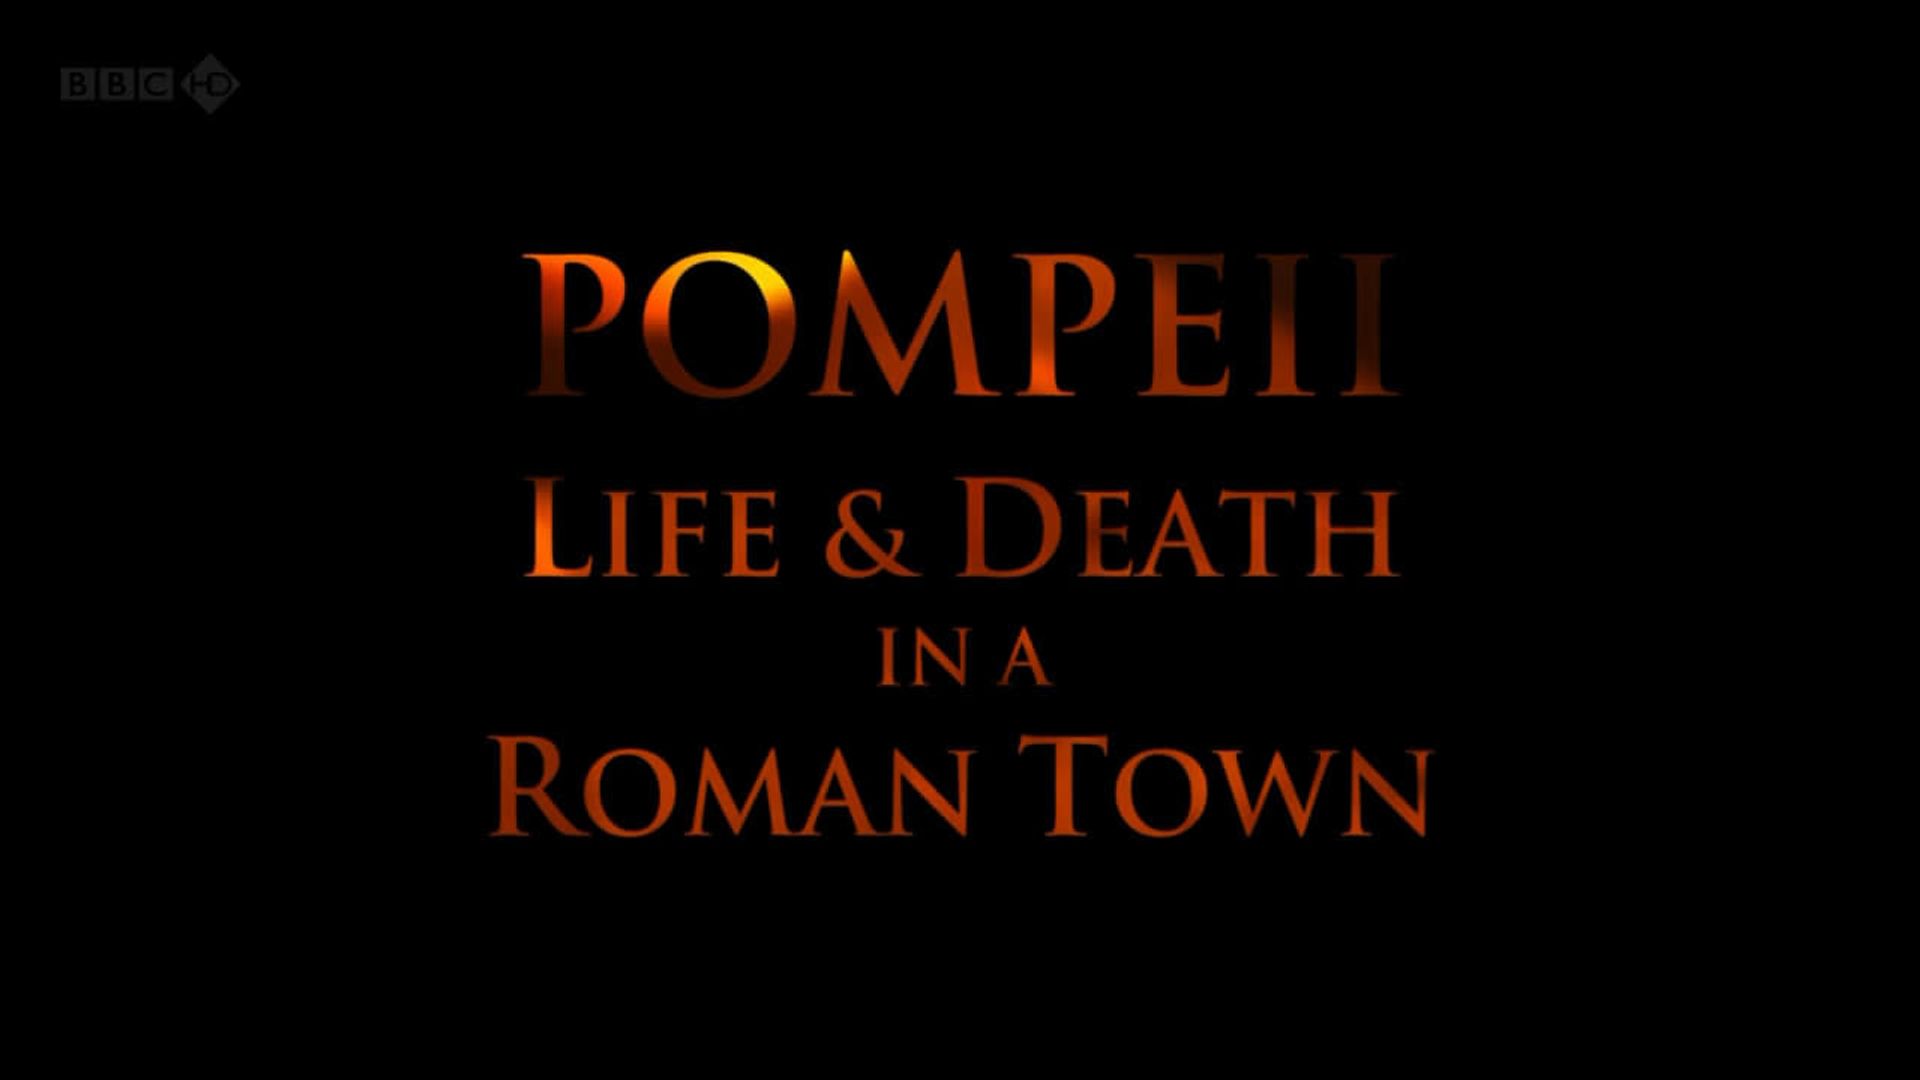 Pompeii: Life & Death in a Roman Town background